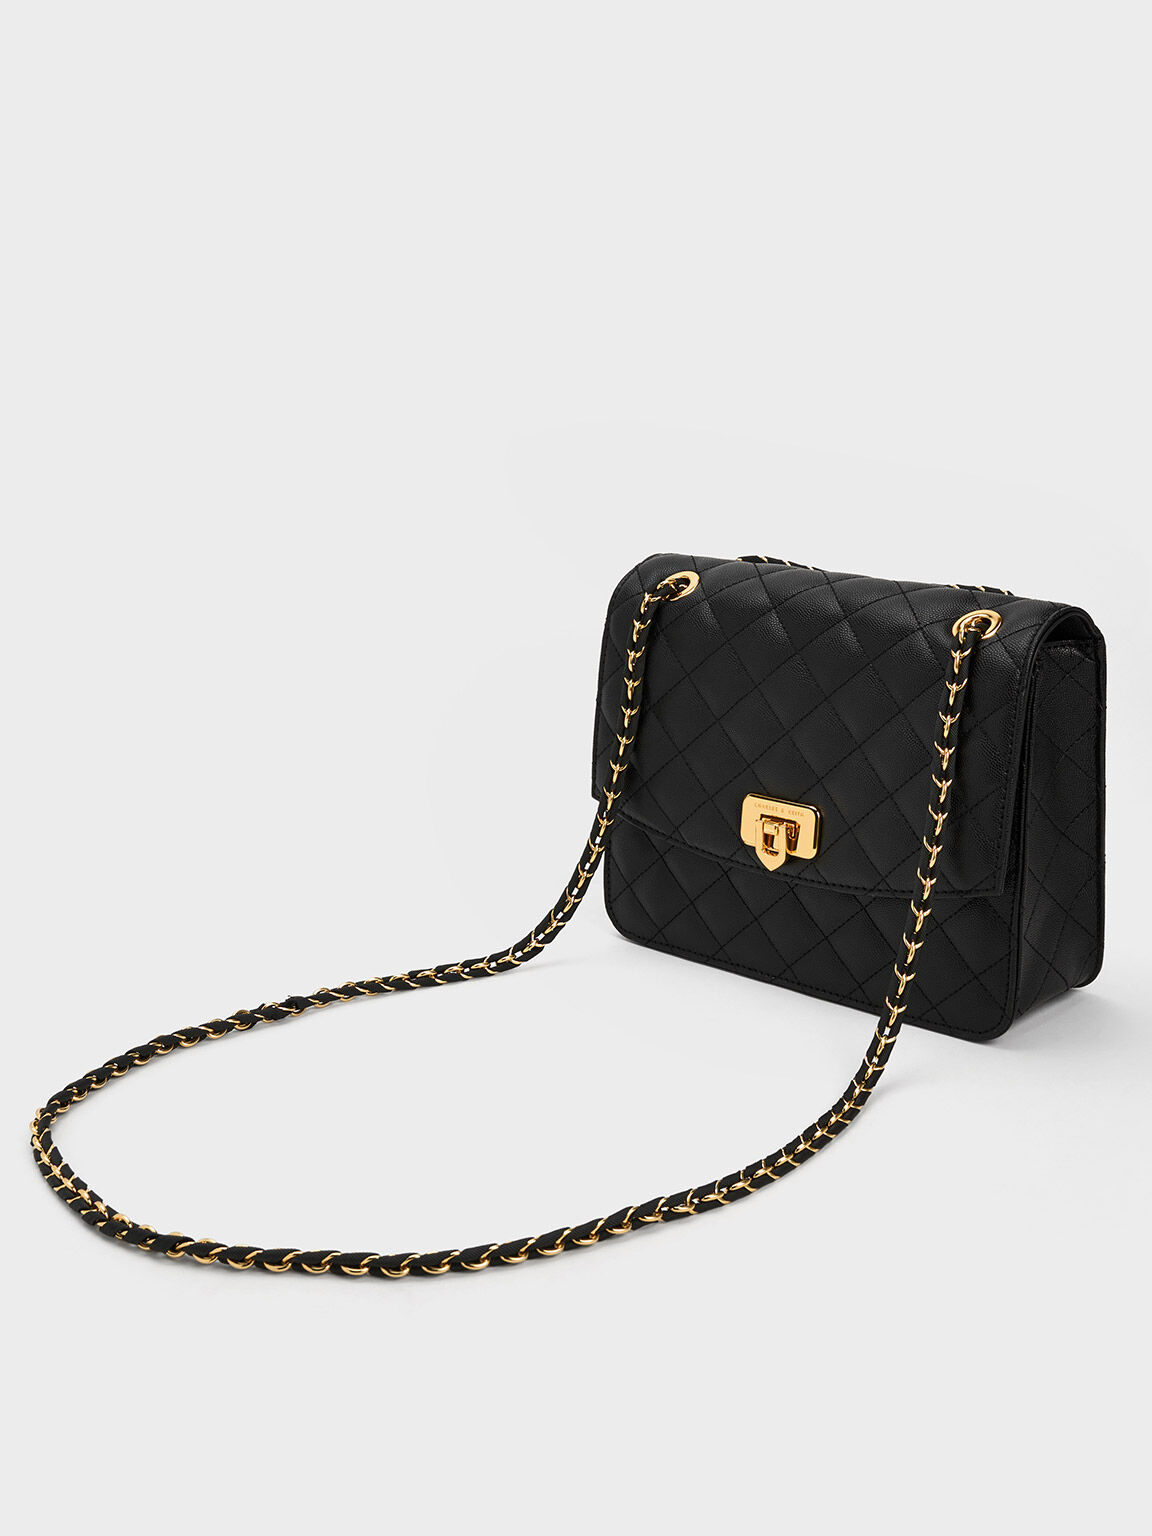 Bally Black Quilted Leather Crossbody Chain Flap Bag 200by29 – Bagriculture